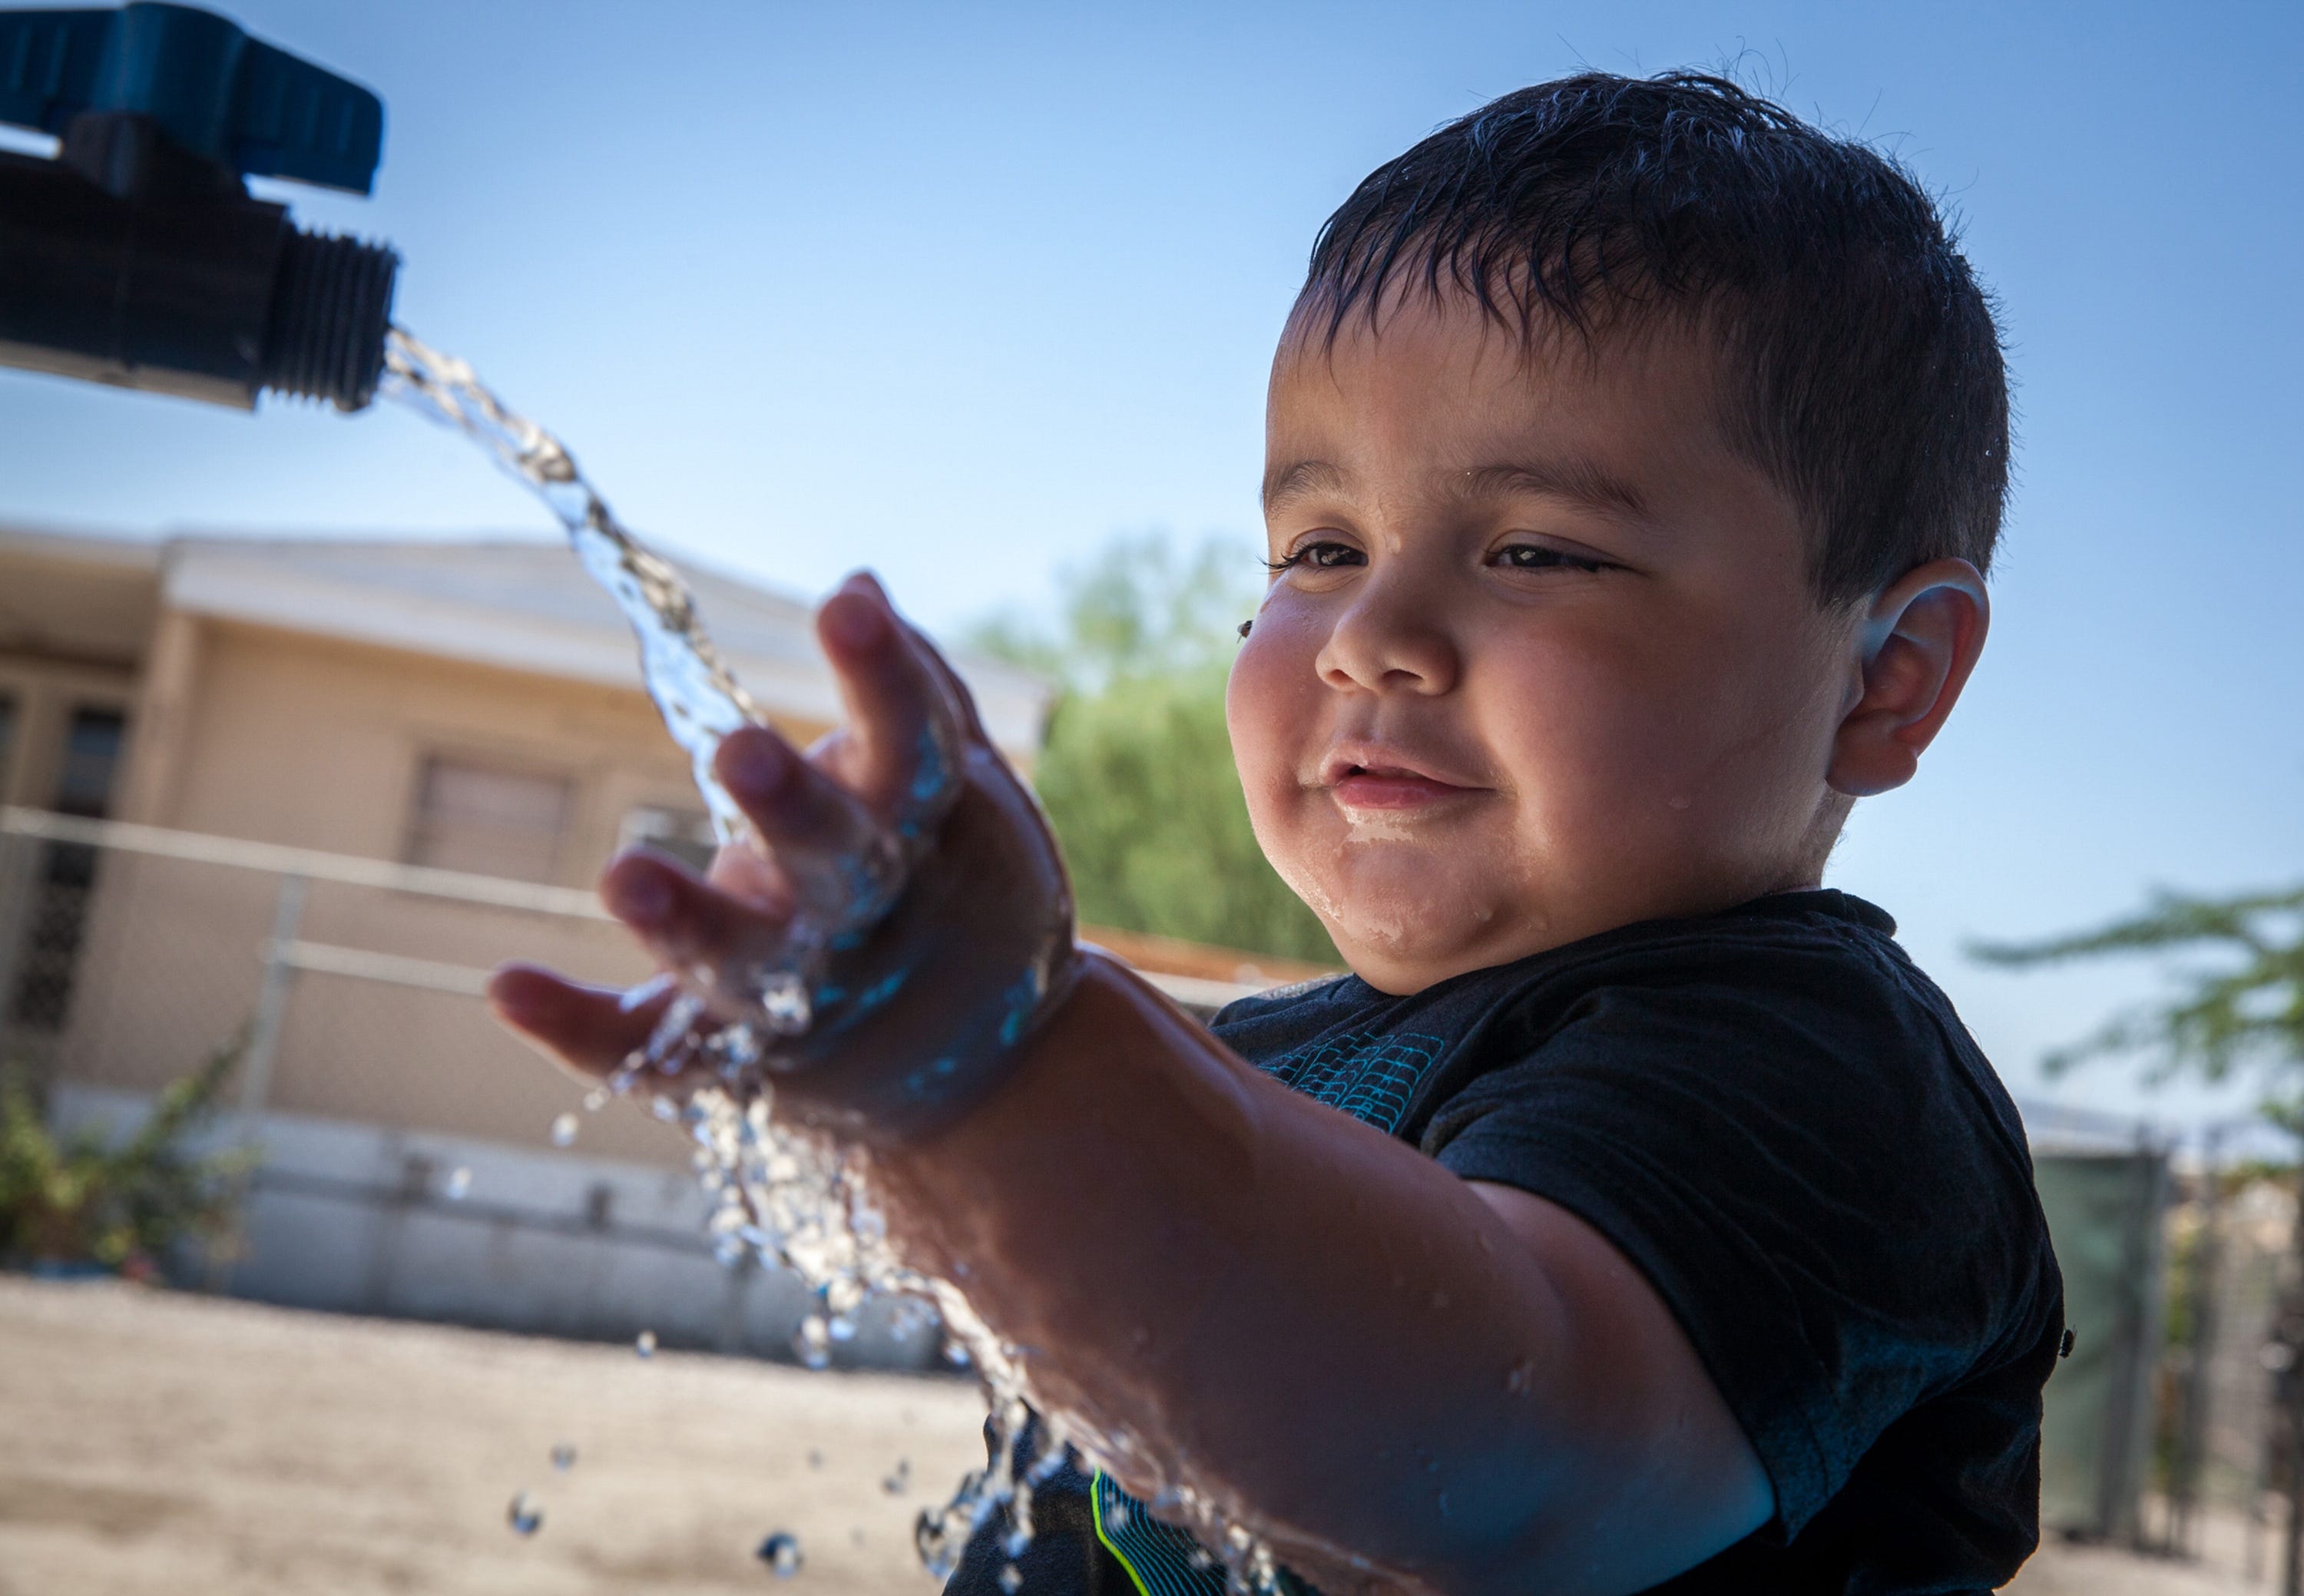 63 million Americans exposed to unsafe drinking water